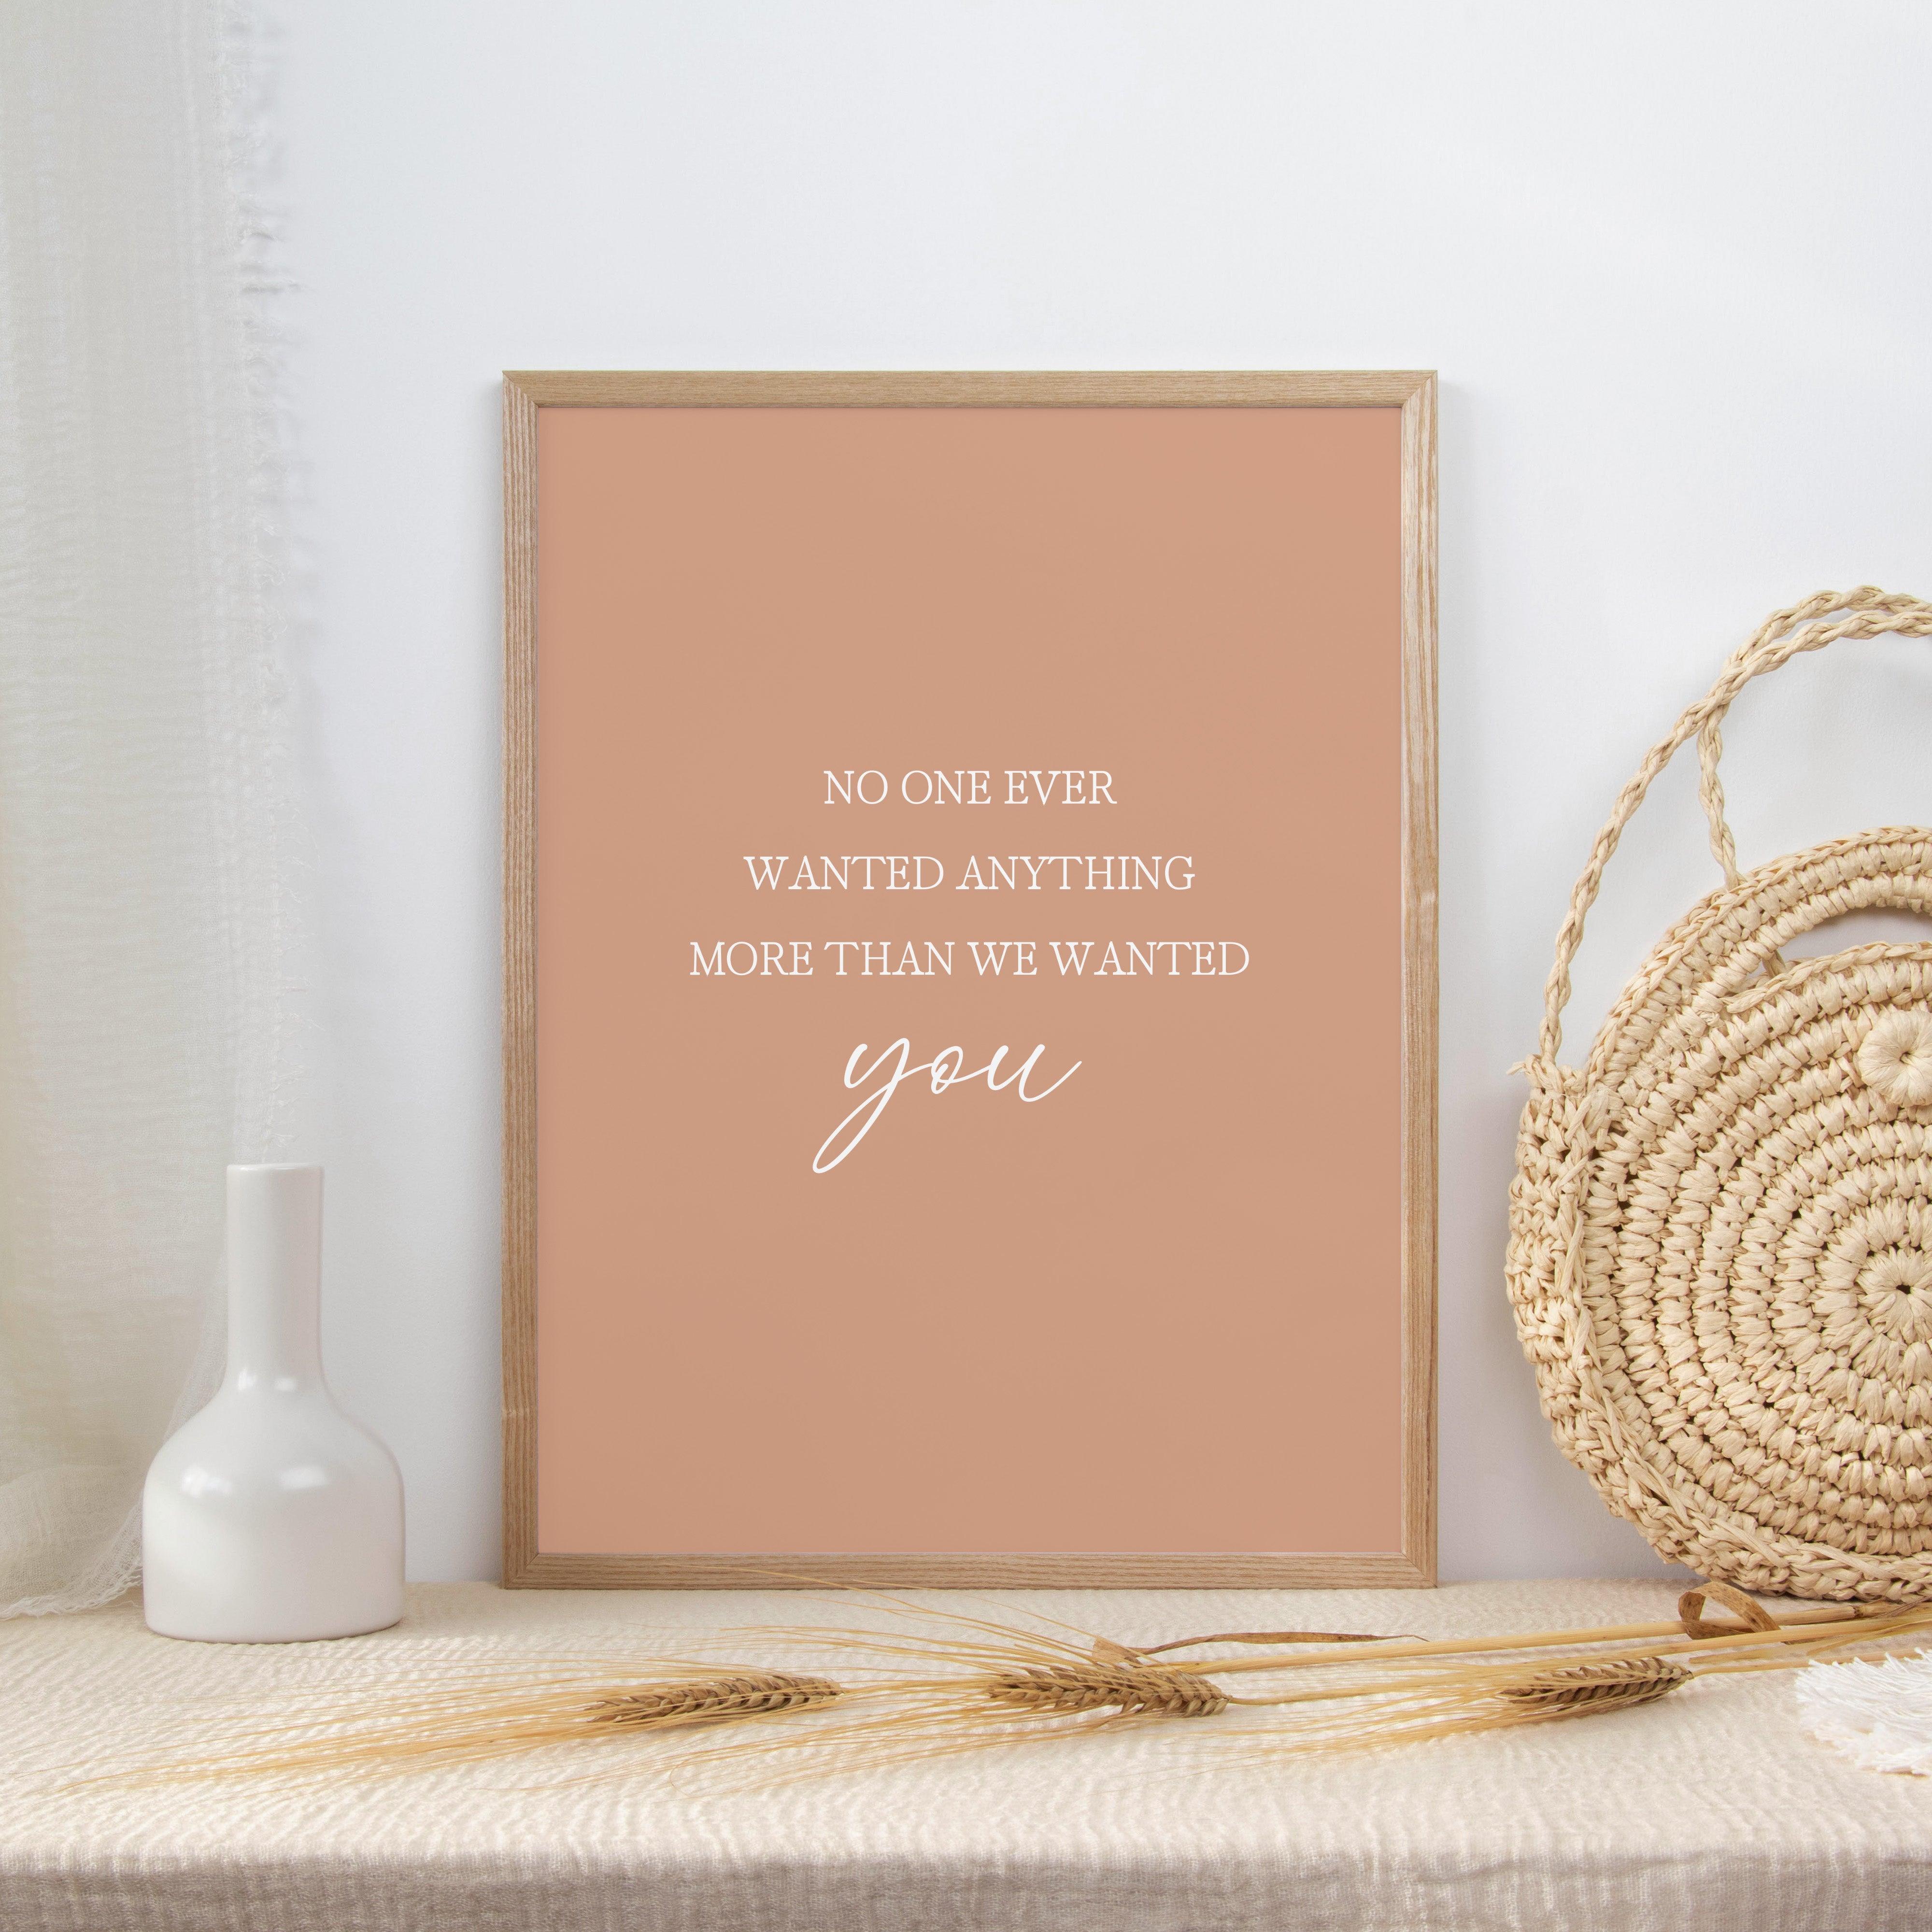 More Than We Wanted You - Stone - Quote Print Poster - The Willow Corner